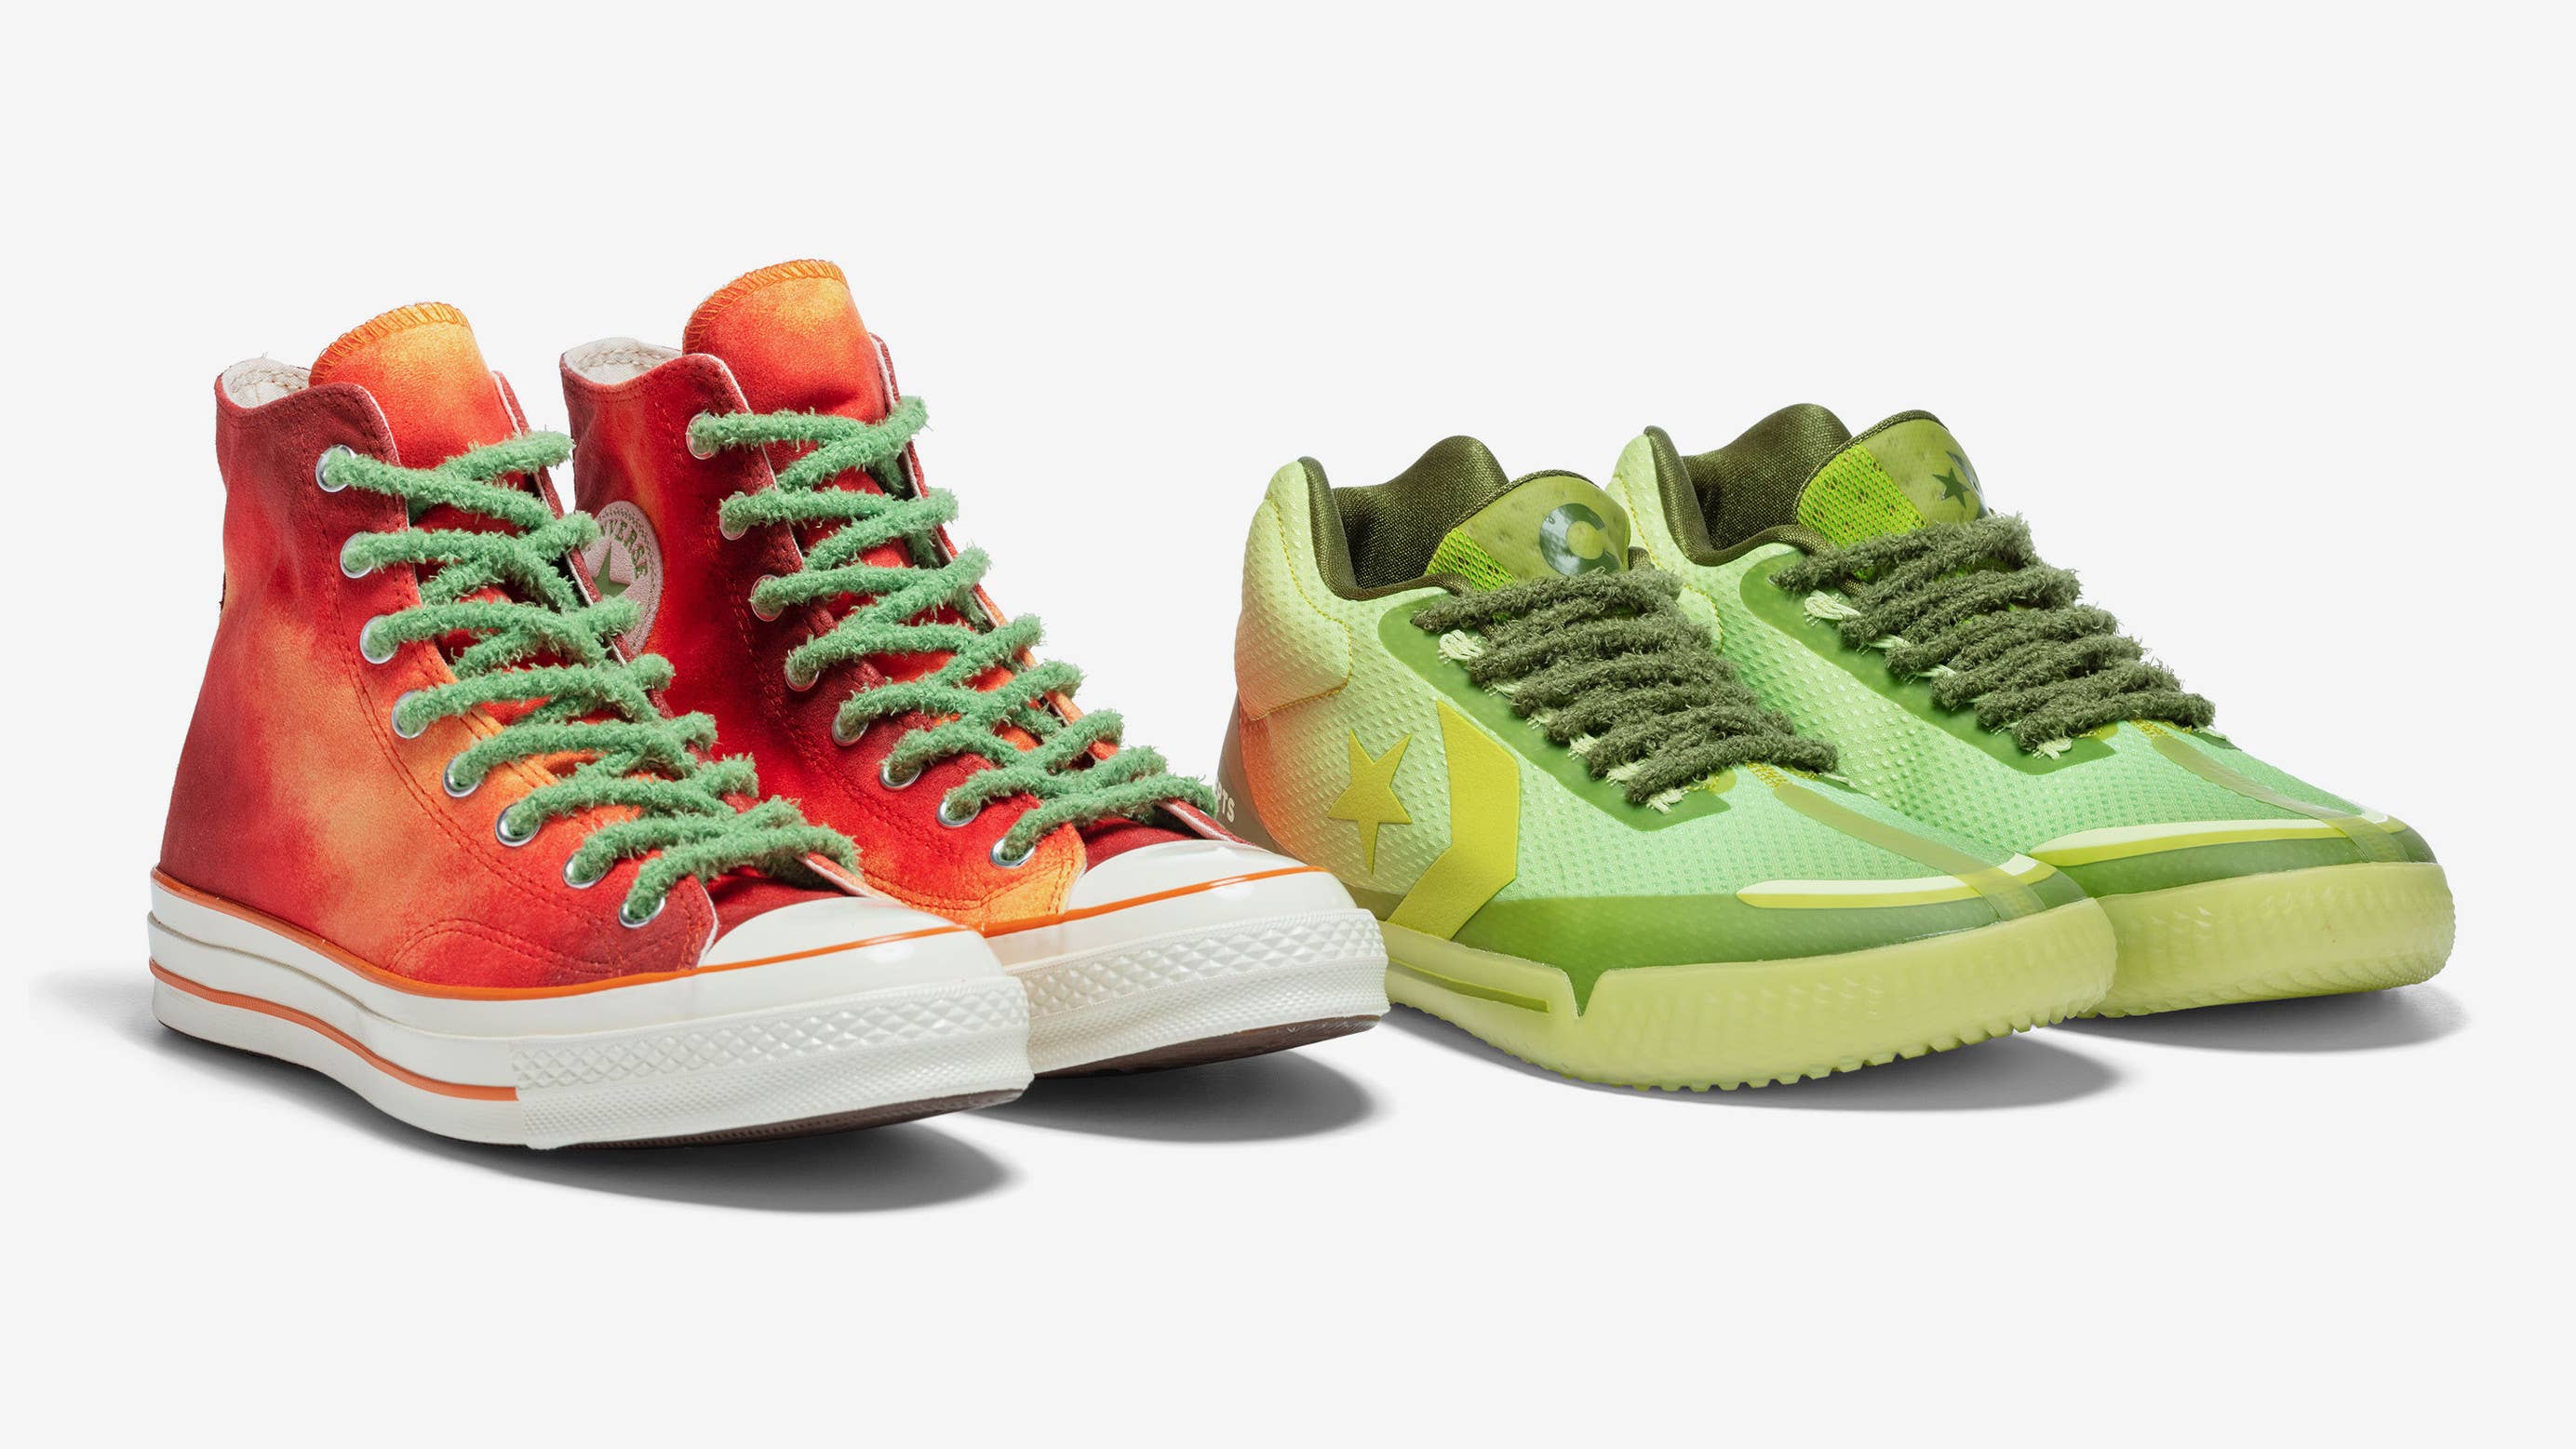 Concepts x Converse 'Southern Flame' Collection